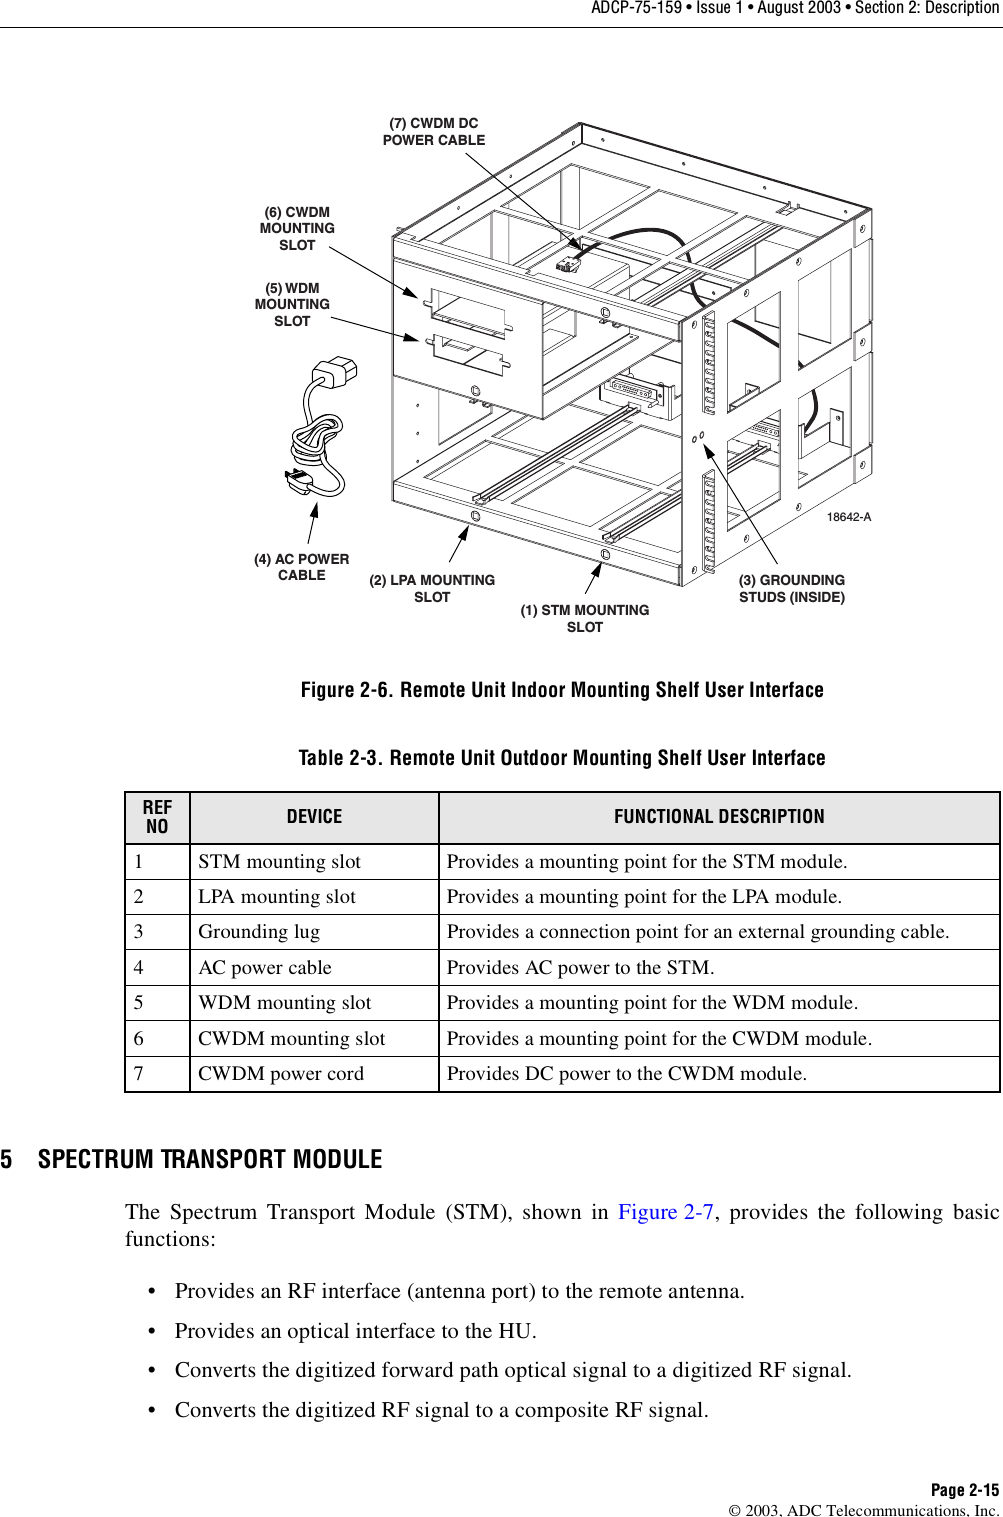 ADCP-75-159 • Issue 1 • August 2003 • Section 2: DescriptionPage 2-15© 2003, ADC Telecommunications, Inc.Figure 2-6. Remote Unit Indoor Mounting Shelf User Interface5 SPECTRUM TRANSPORT MODULEThe Spectrum Transport Module (STM), shown in Figure 2-7, provides the following basicfunctions:• Provides an RF interface (antenna port) to the remote antenna. • Provides an optical interface to the HU. • Converts the digitized forward path optical signal to a digitized RF signal. • Converts the digitized RF signal to a composite RF signal. Table 2-3. Remote Unit Outdoor Mounting Shelf User InterfaceREF NO DEVICE FUNCTIONAL DESCRIPTION1 STM mounting slot Provides a mounting point for the STM module.2 LPA mounting slot Provides a mounting point for the LPA module.3 Grounding lug Provides a connection point for an external grounding cable. 4 AC power cable Provides AC power to the STM.5 WDM mounting slot Provides a mounting point for the WDM module. 6 CWDM mounting slot Provides a mounting point for the CWDM module.7 CWDM power cord Provides DC power to the CWDM module.18642-A(1) STM MOUNTINGSLOT(2) LPA MOUNTINGSLOT(4) AC POWERCABLE(5) WDMMOUNTINGSLOT(6) CWDMMOUNTINGSLOT(7) CWDM DCPOWER CABLE(3) GROUNDINGSTUDS (INSIDE)